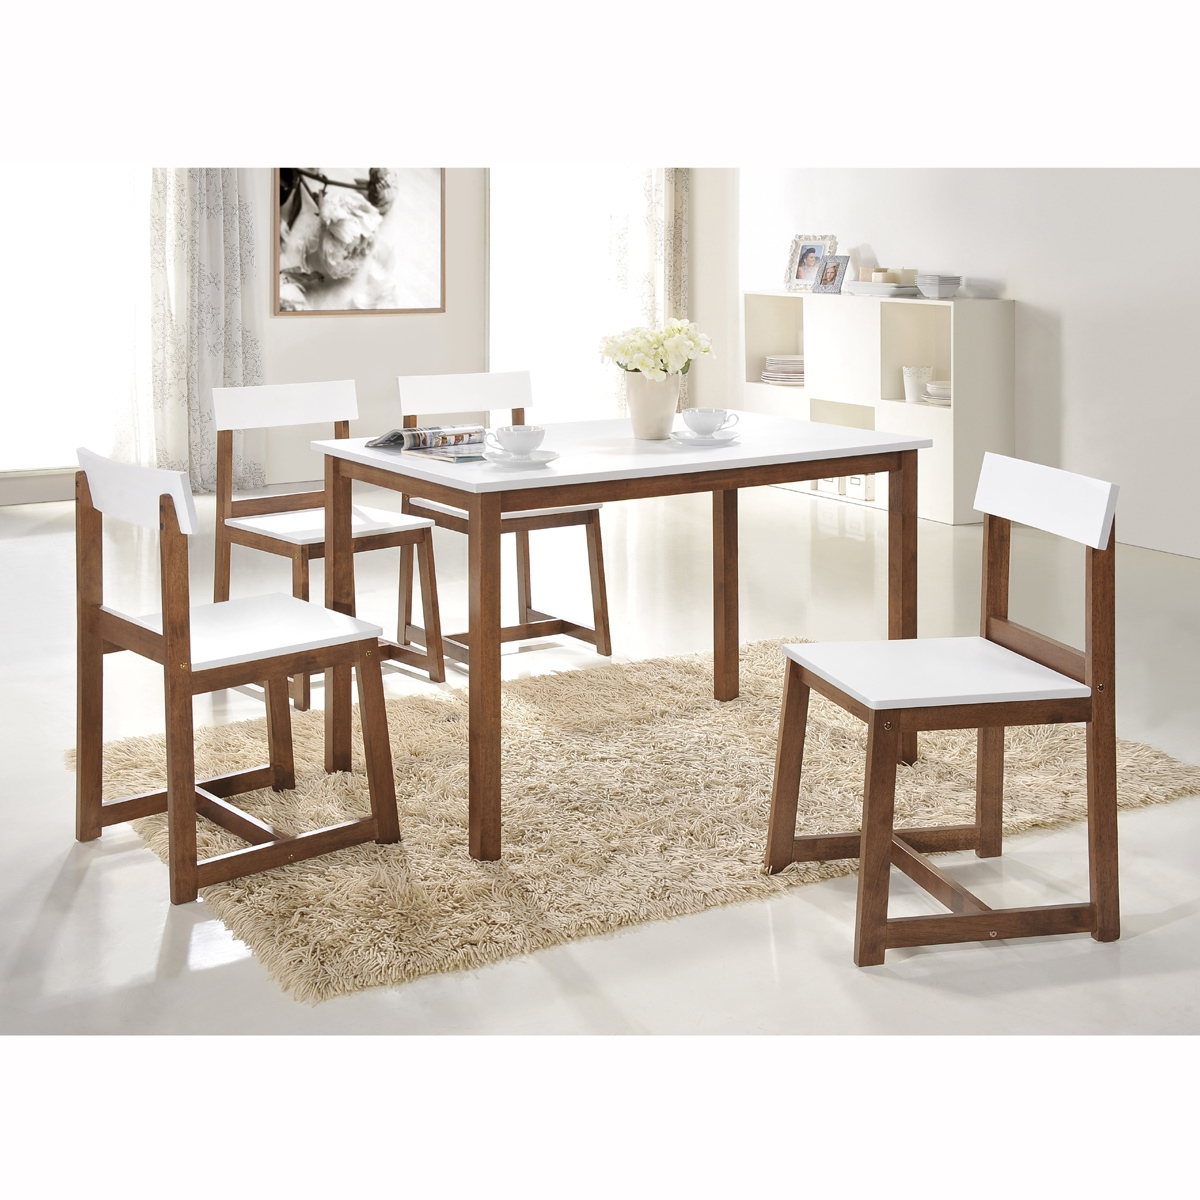 Dining Table Chairs Vancouver Bc • Faucet Ideas Site